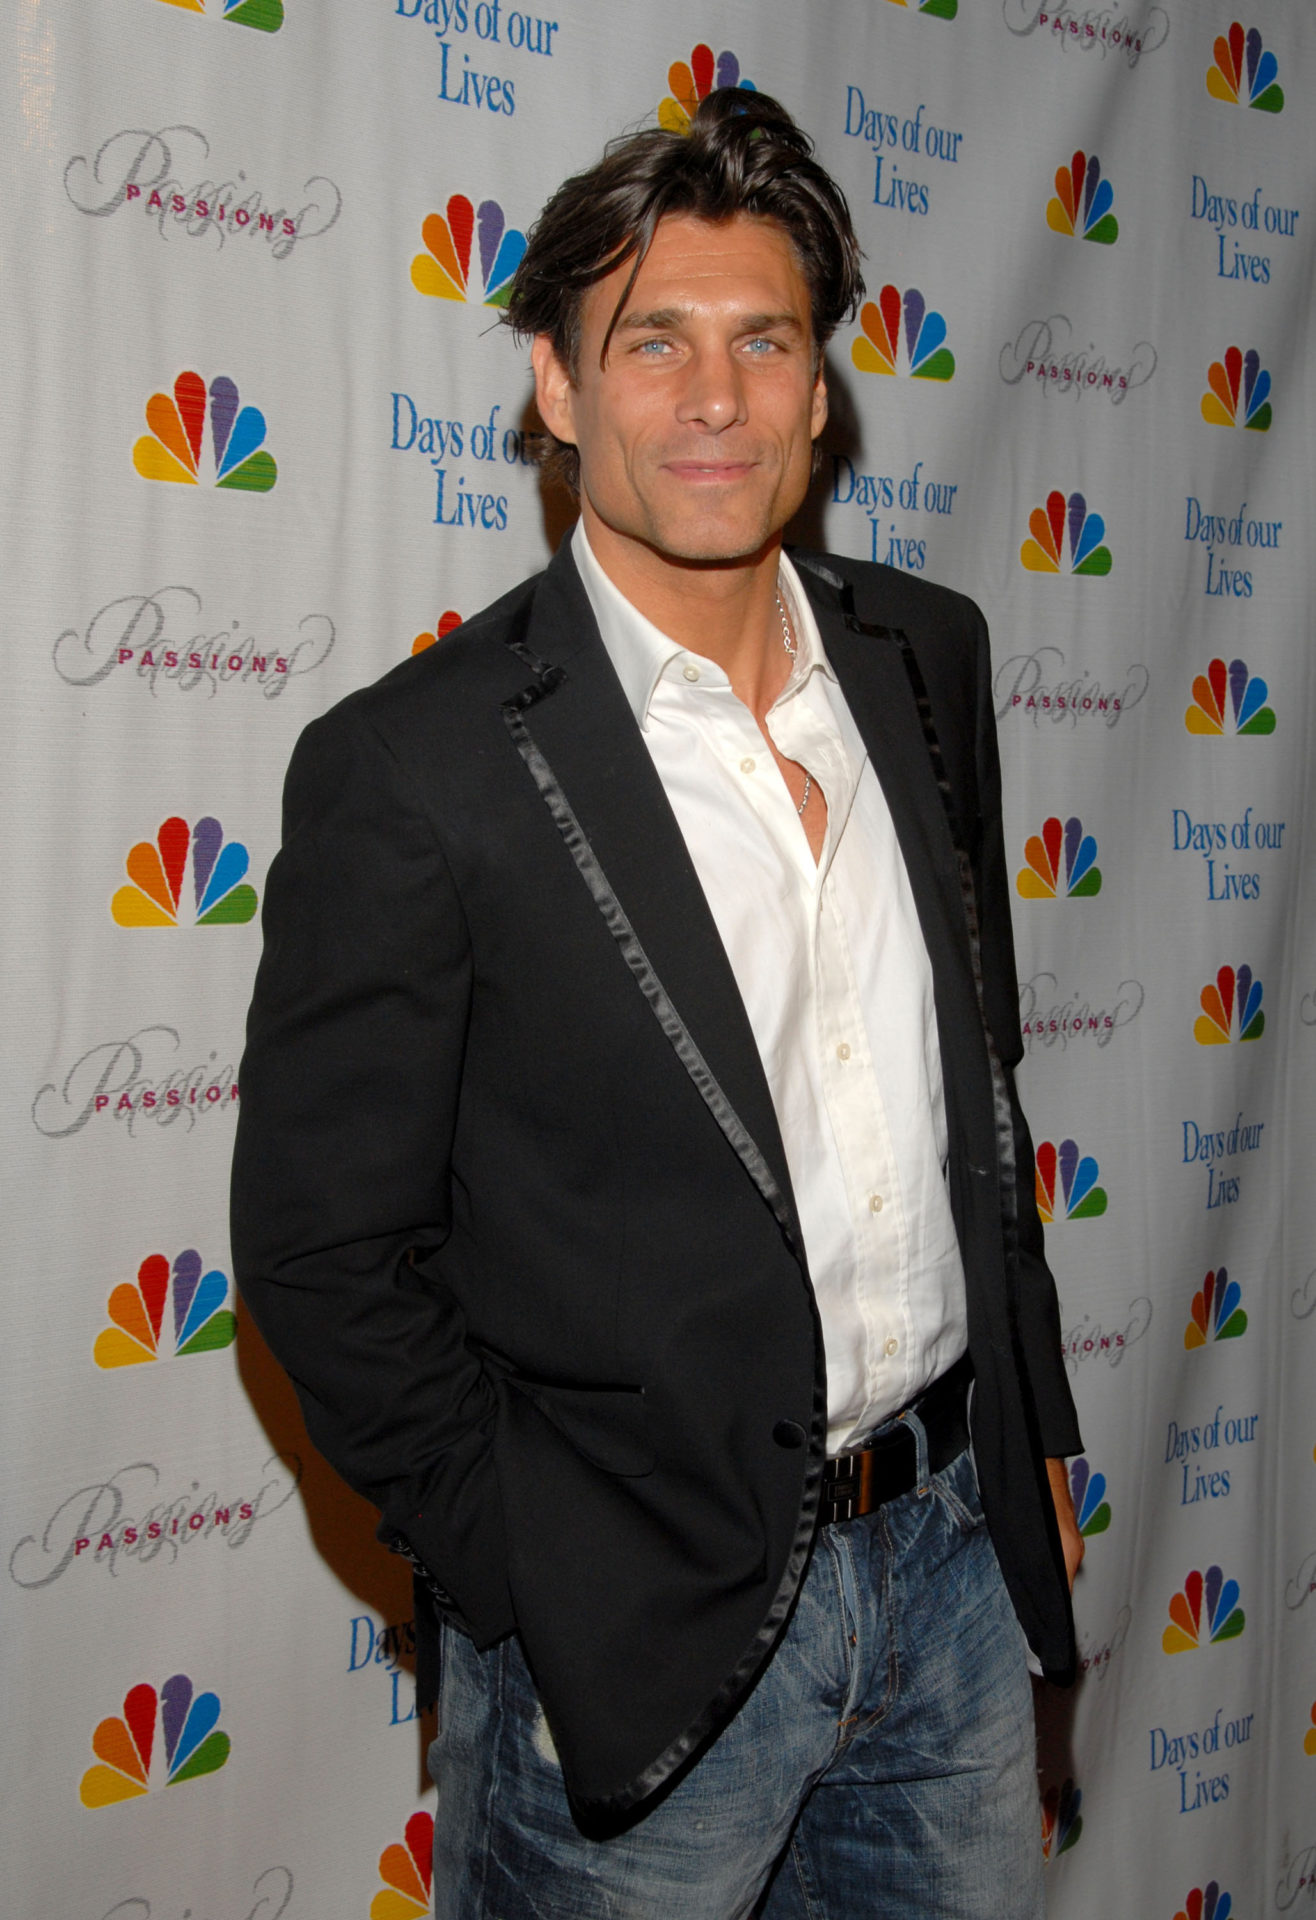 NBC's Daytime Dramas "Days of Our Lives" and "Passions" Pre Emmy Party